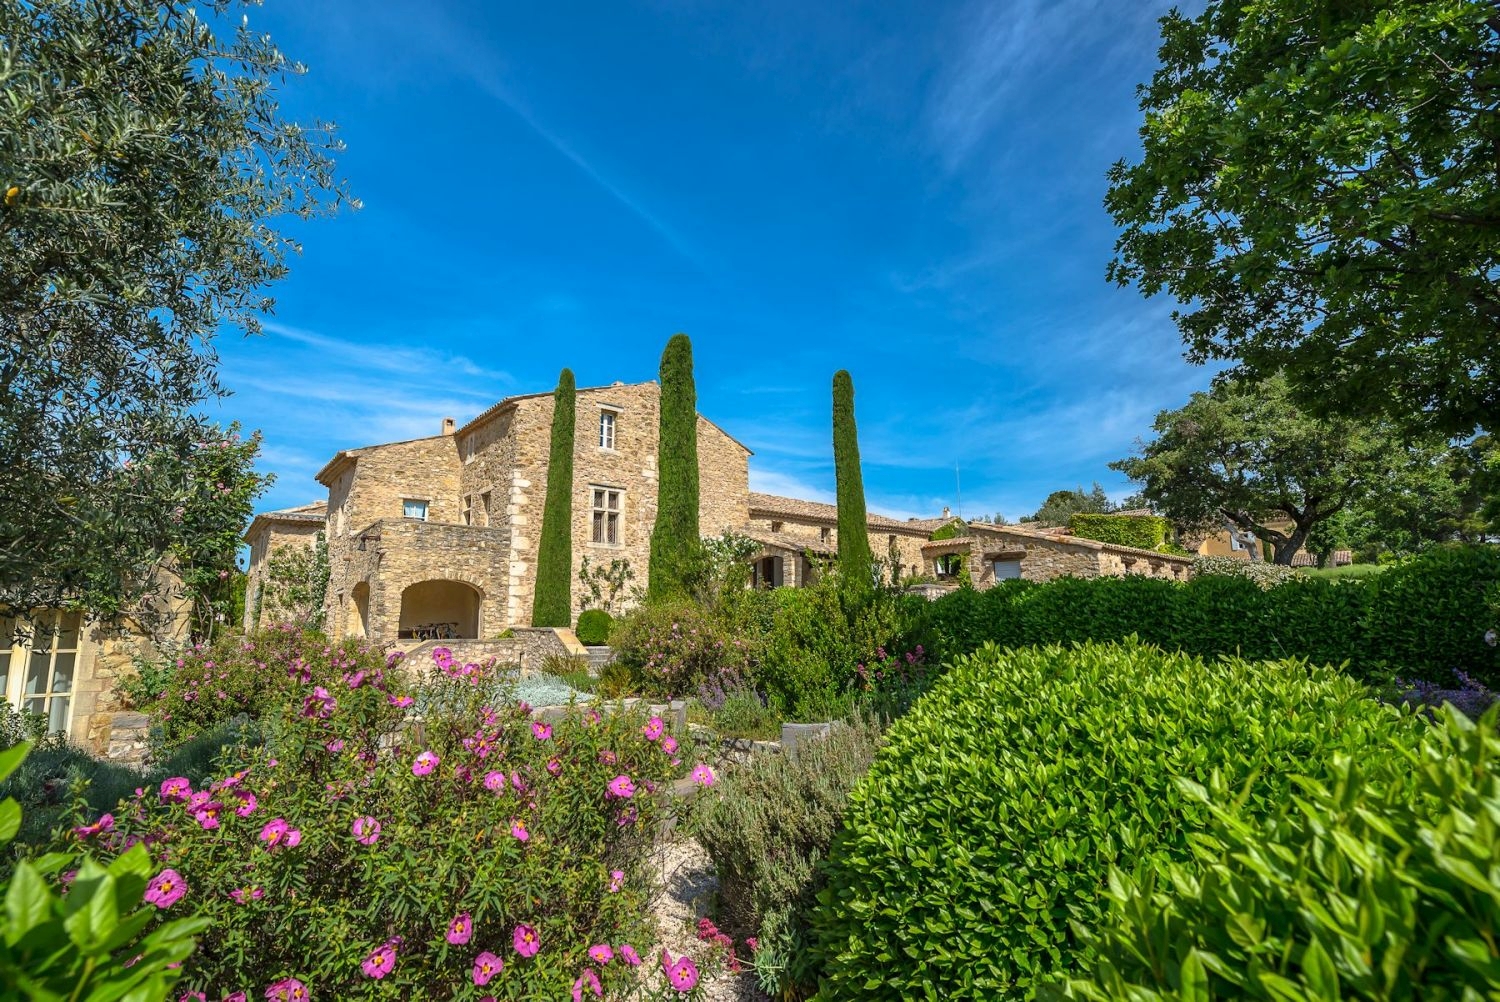 Façade and gardens with plants, flowers and trees at Domaine des Coteaux in Provence, France